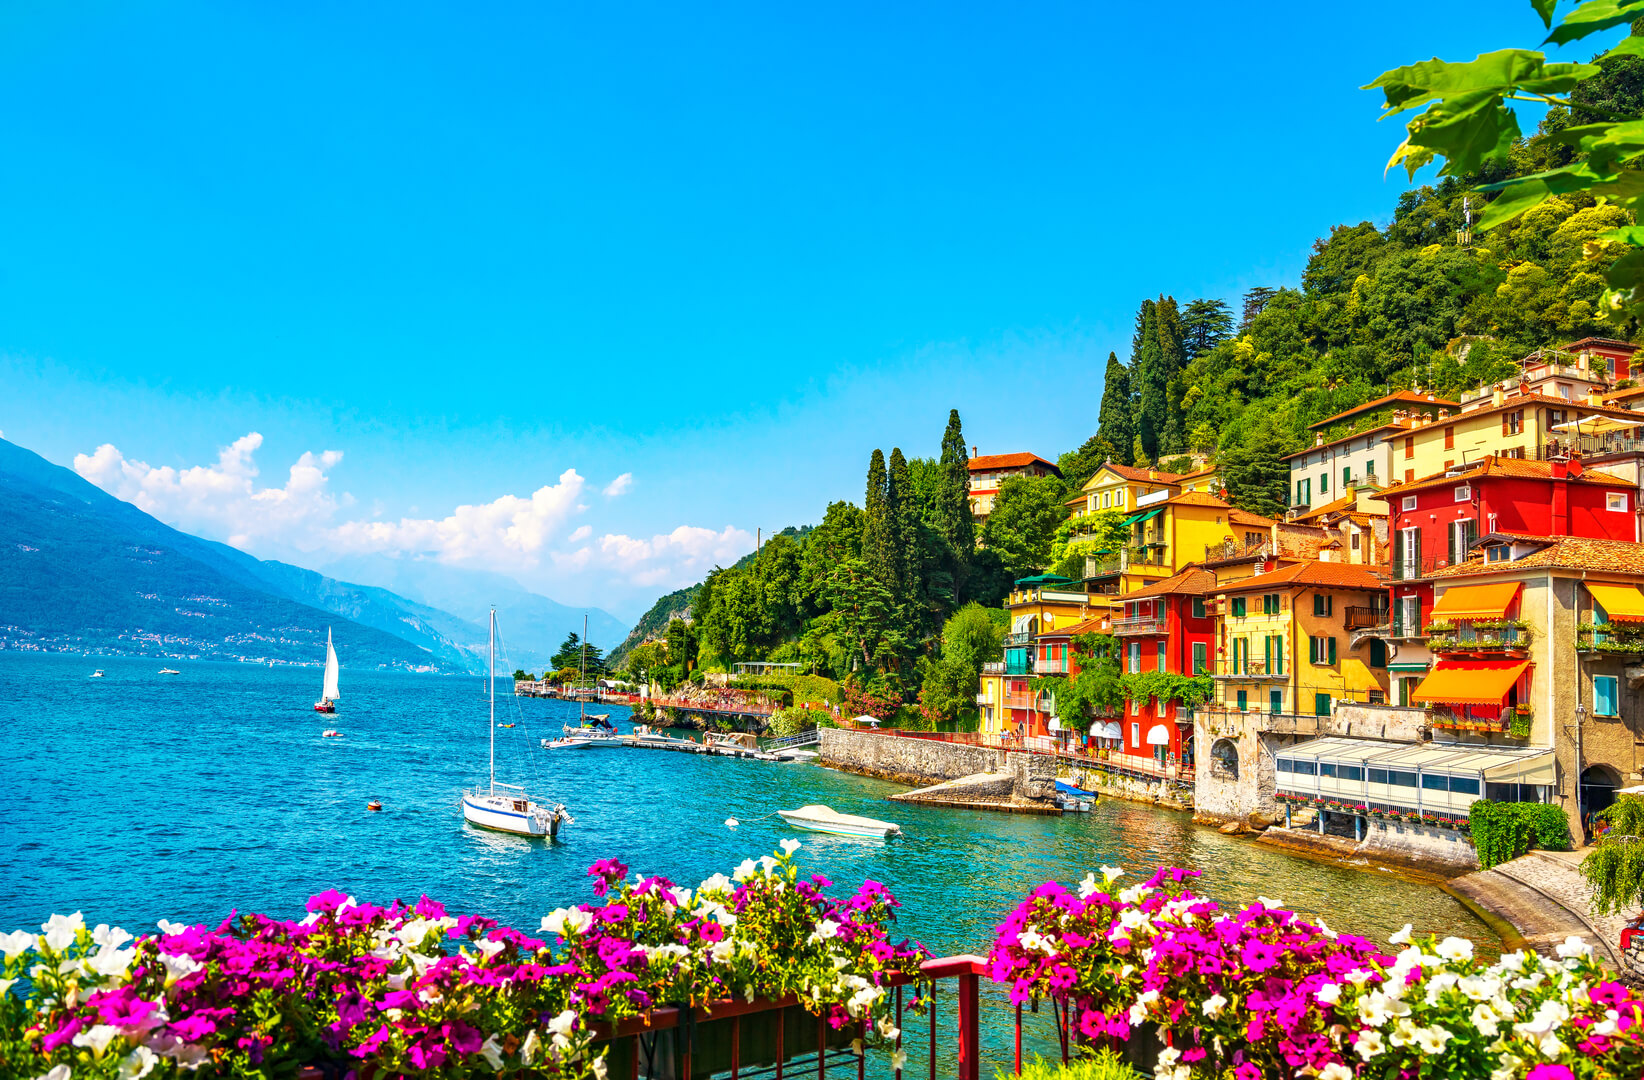 City of Varenna in the Lake Como district. Traditional Italian lakeside village. Italy, Europe.